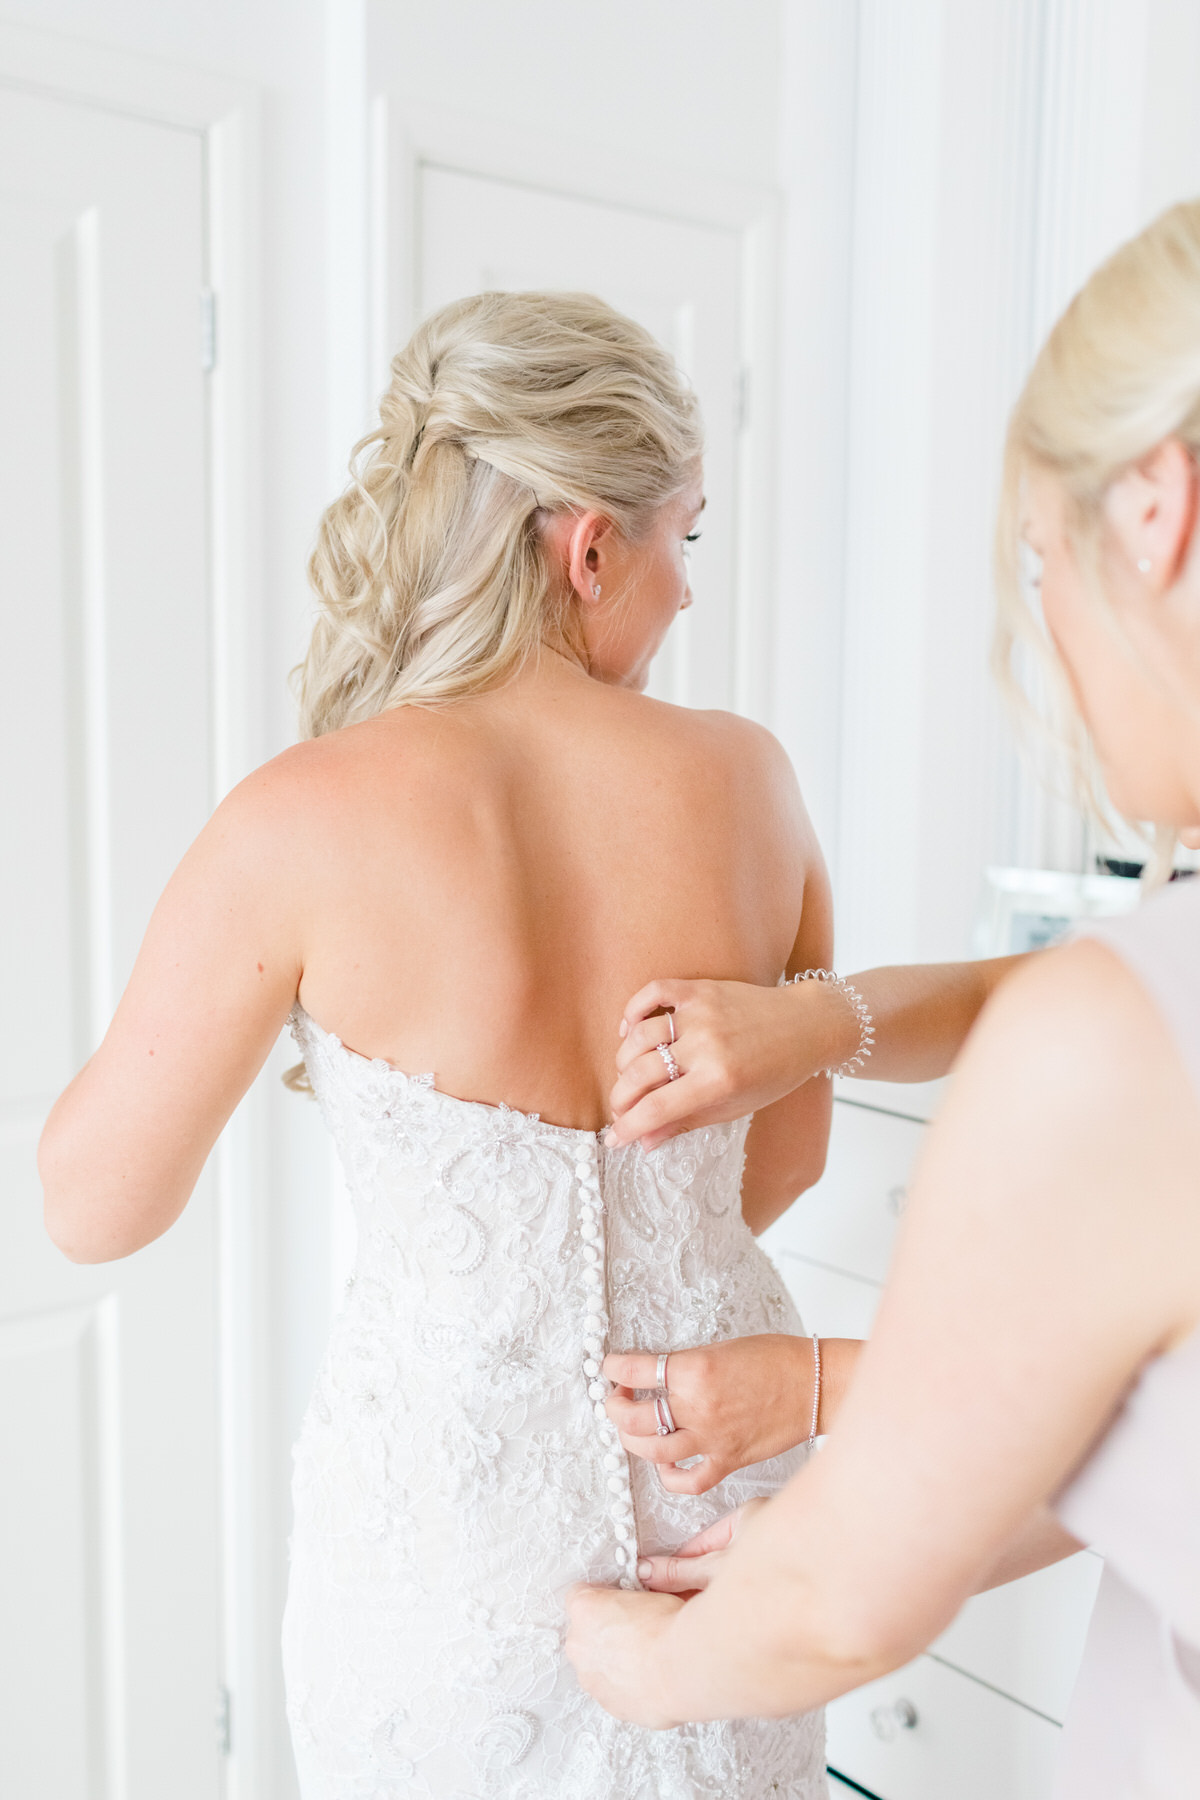 Bride getting ready, lace wedding dress, fitted wedding dress, bridal prep, wedding morning, wedding dress inspiration